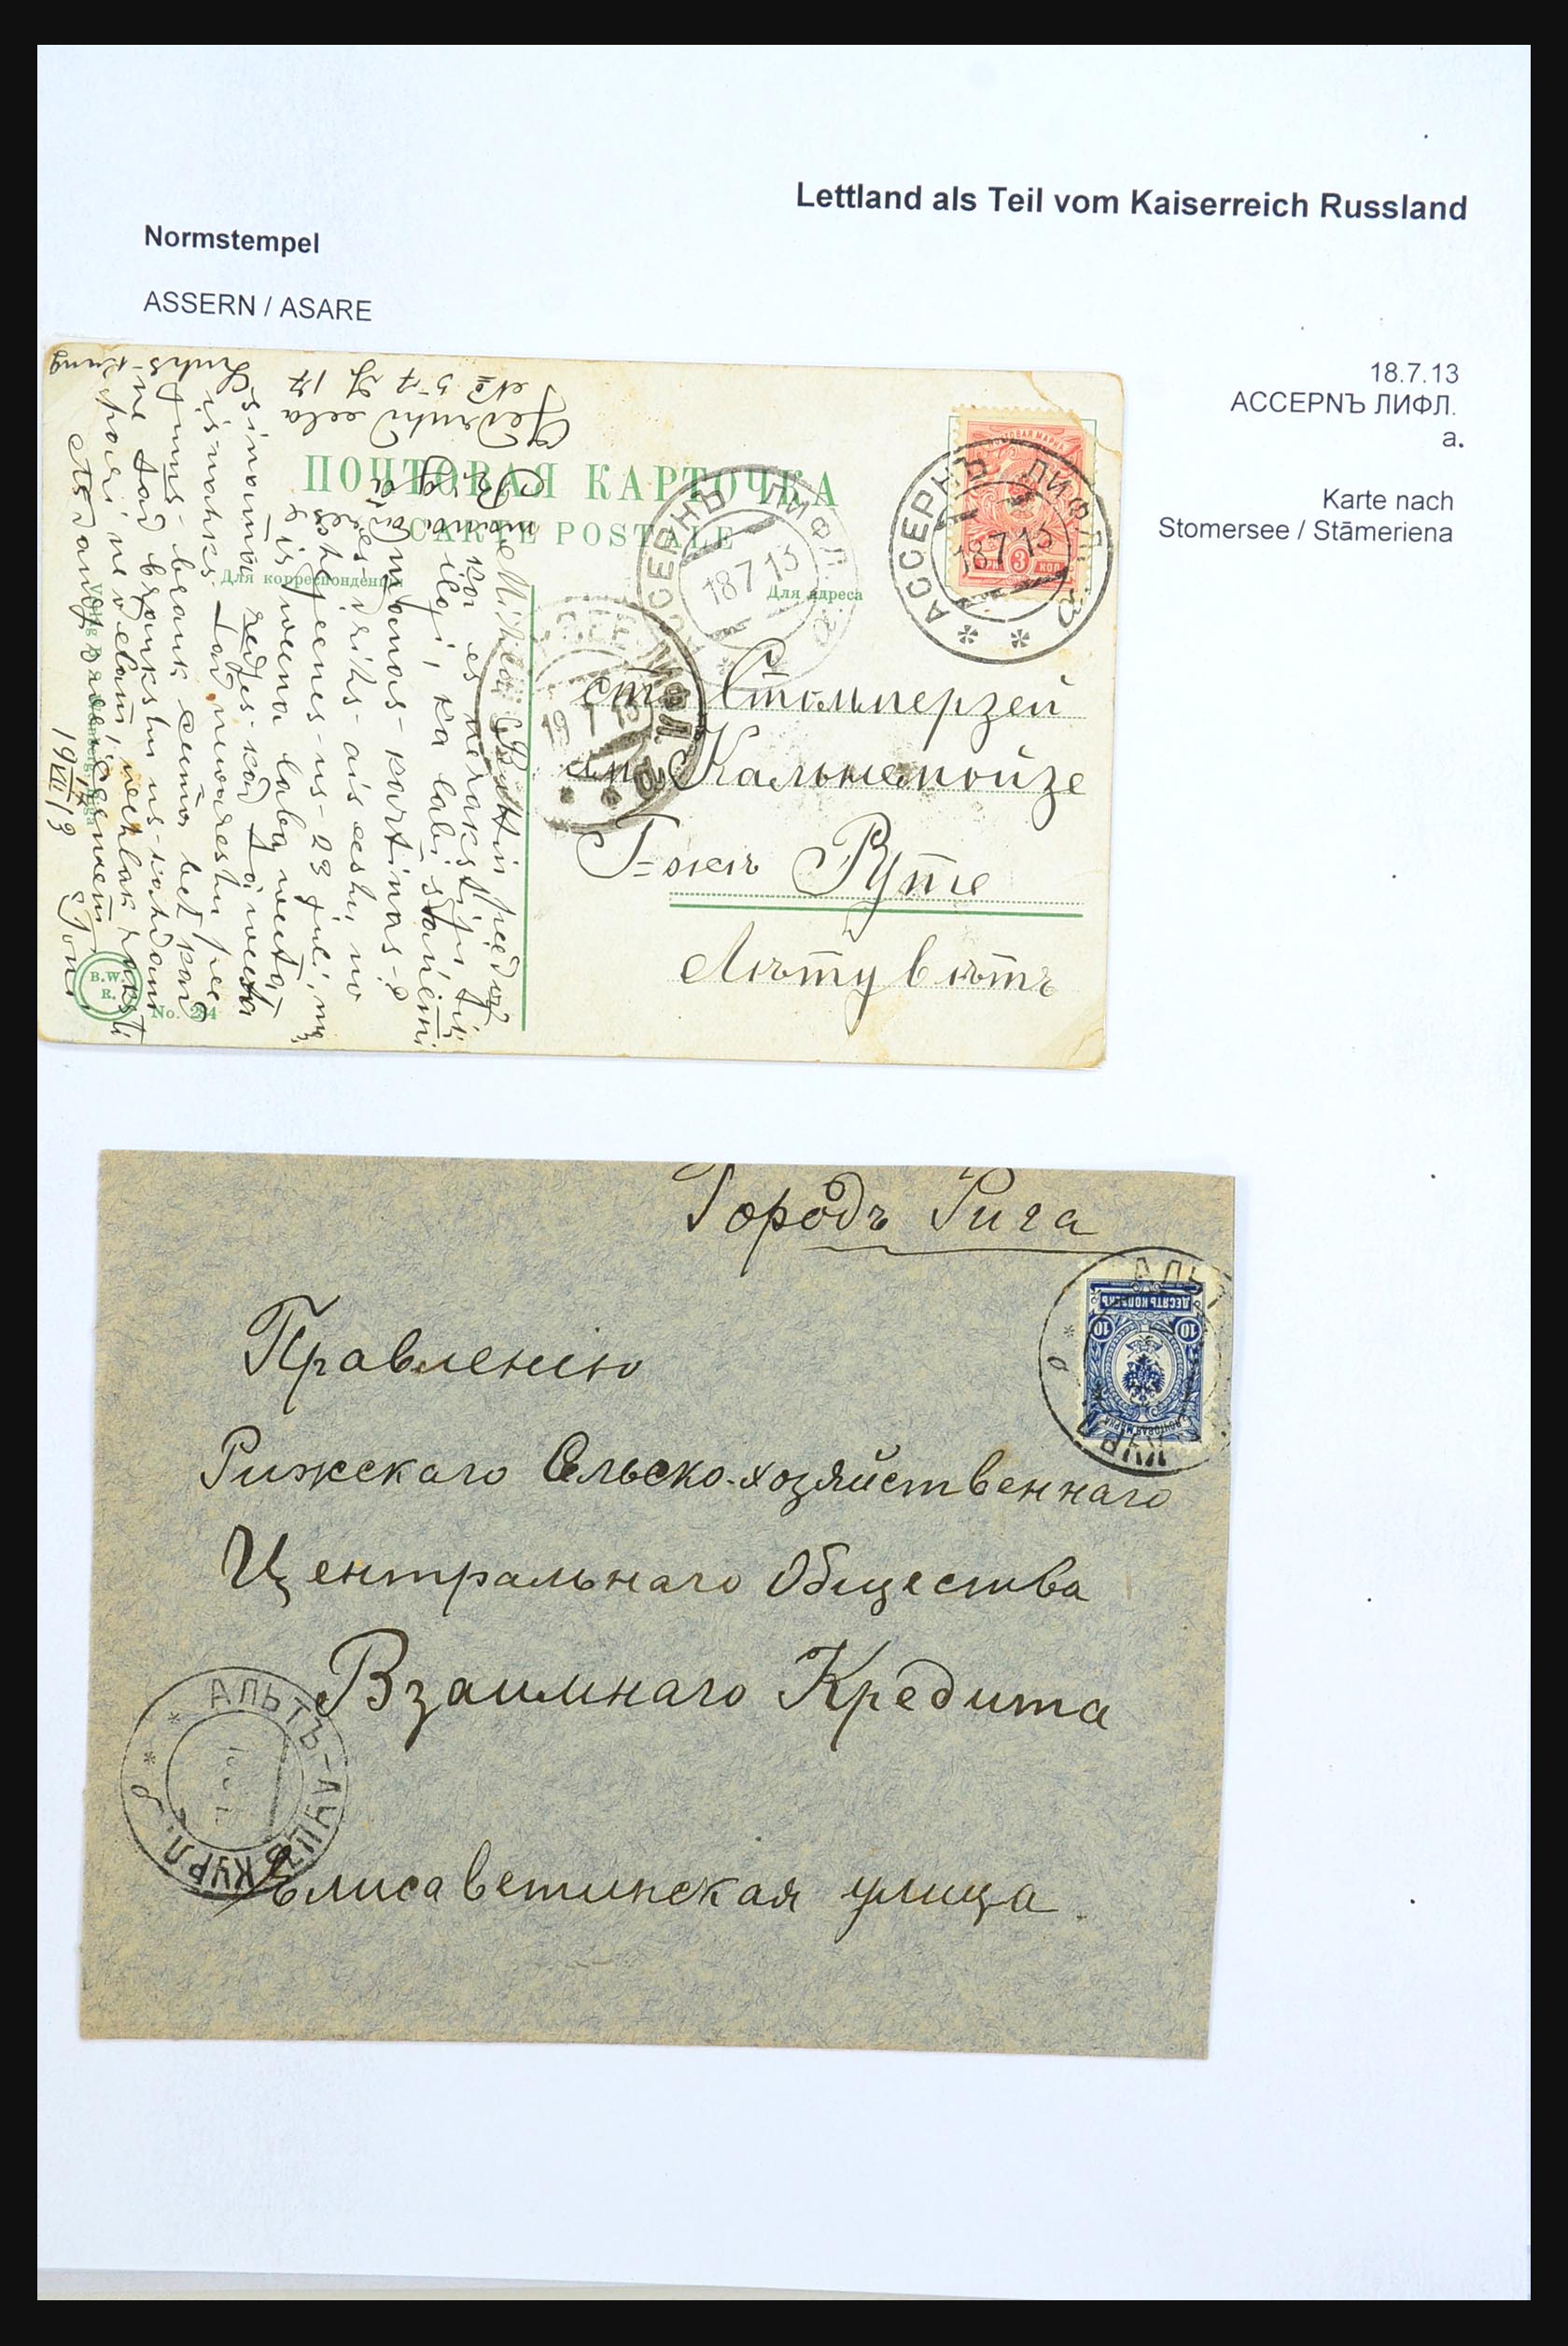 31305 078 - 31305 Latvia as part of Russia 1817-1918.